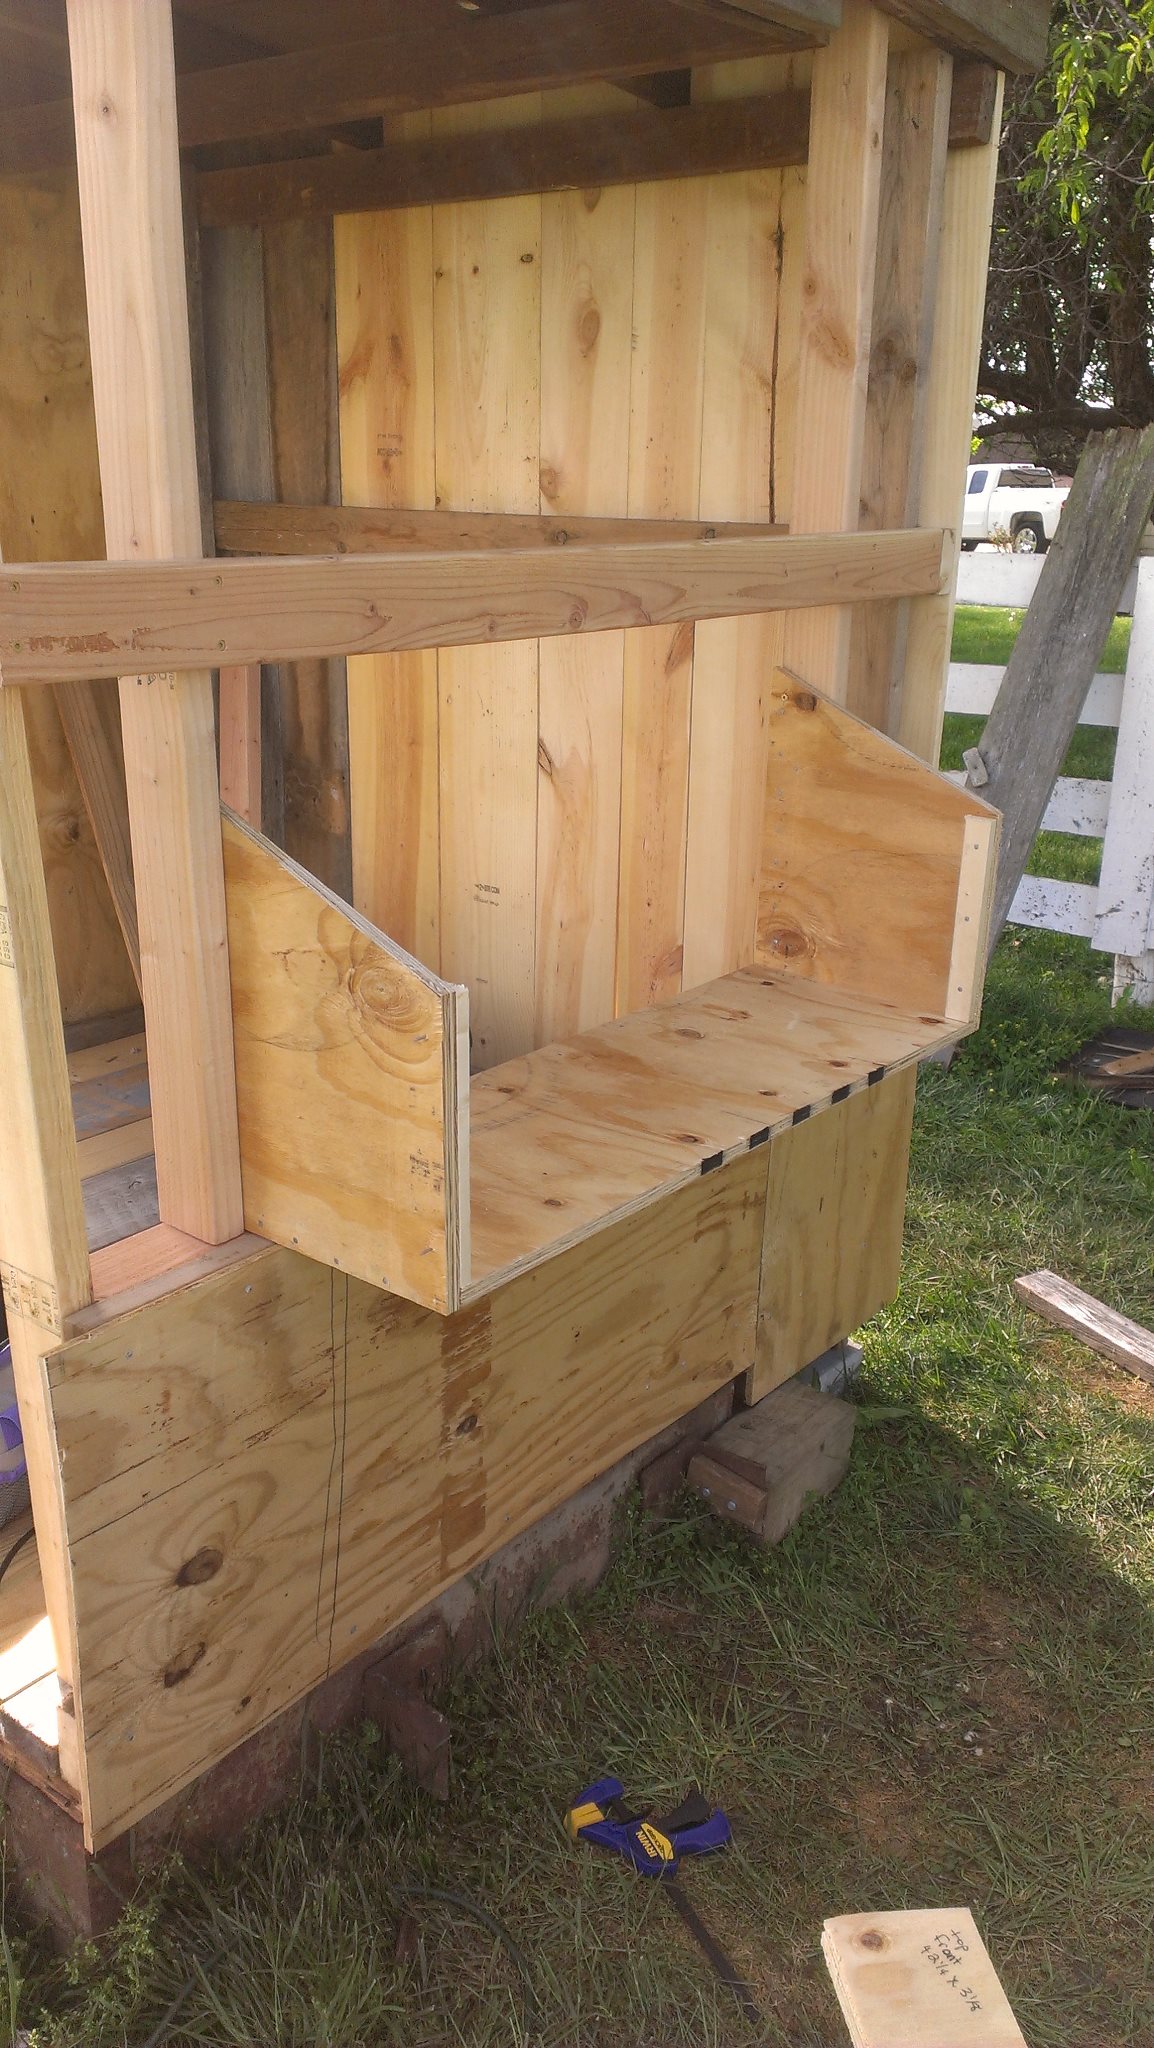 Another view of the nest box being built. I had to use very thick plywood because the plans call for the highest point of the sides to be 18". After four straight days of rain, I noticed one end of the access panel door has swollen and I will be replacing it with a piece of wood. since the height is just a little over 8". I will also be replacing the narrow strip above the access panel with wood.